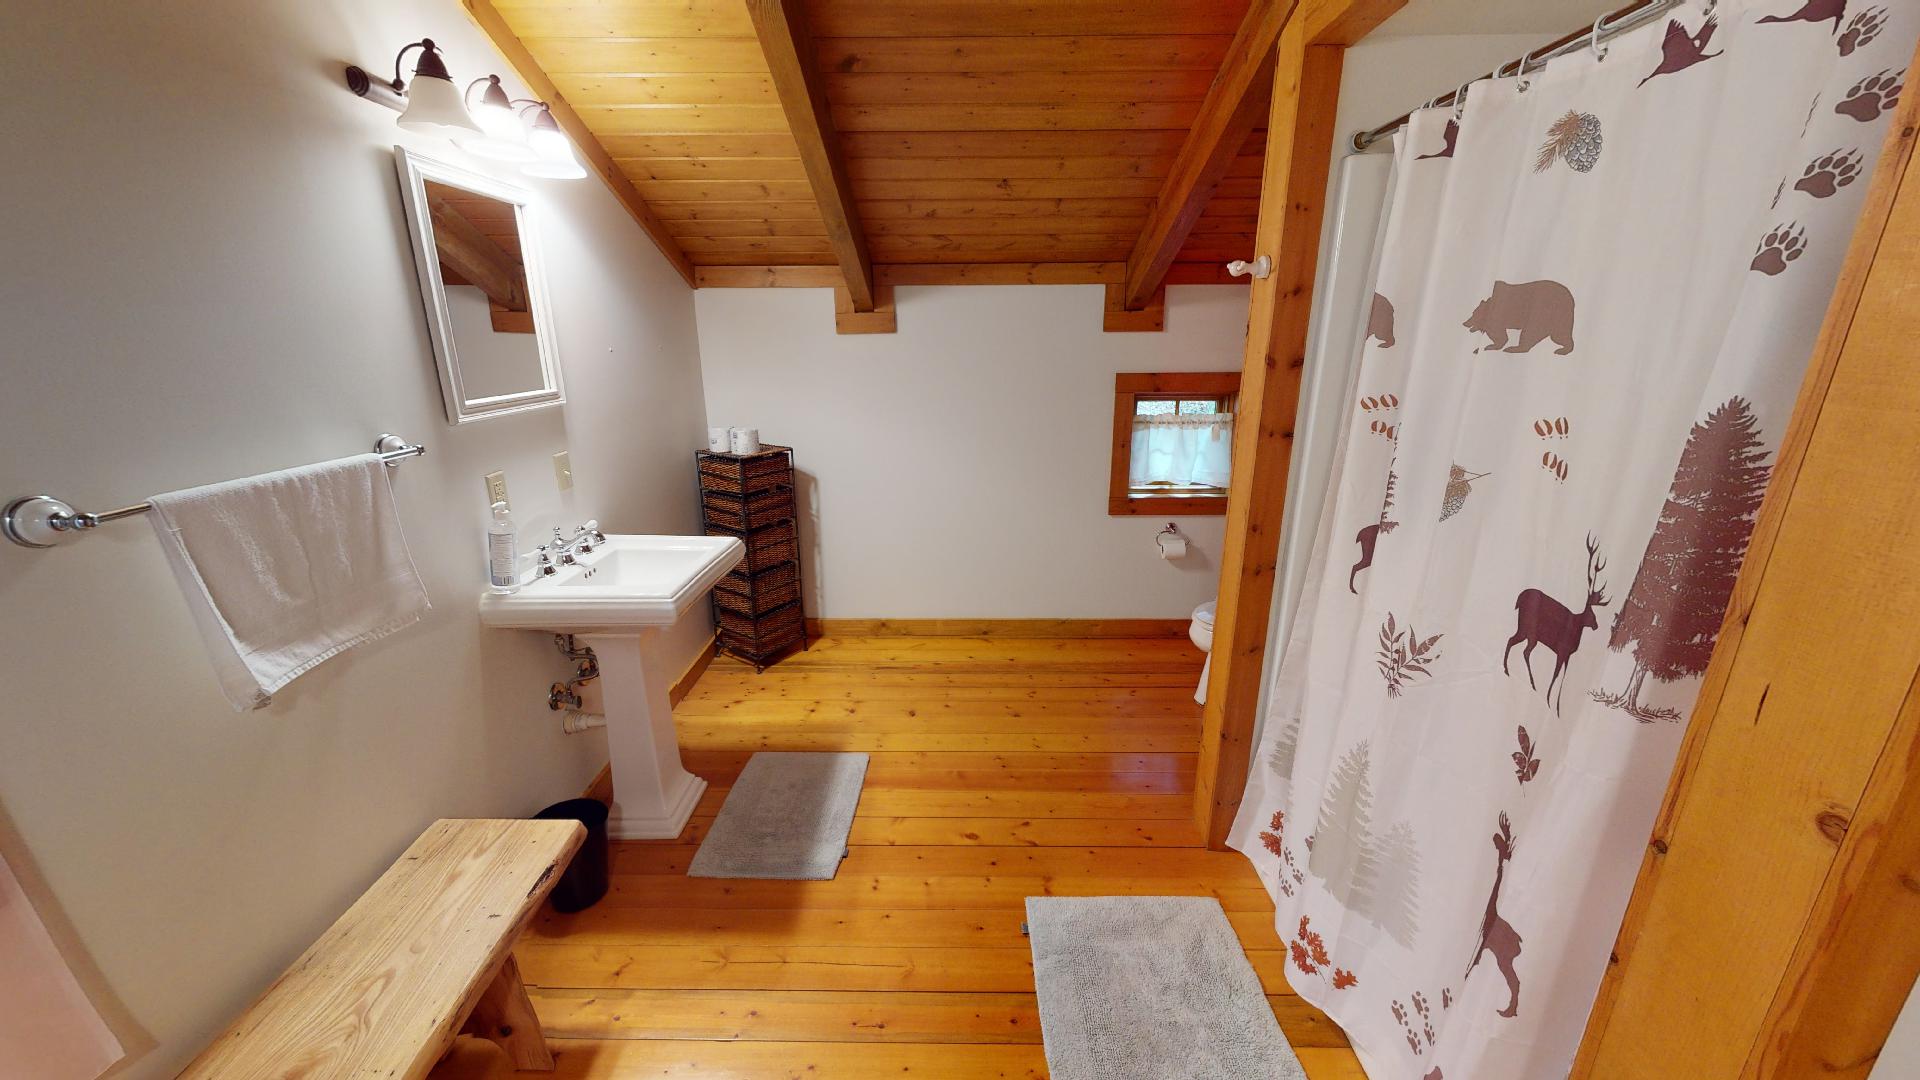 Photo 619_10214.jpg - Located in the loft, this is a common bath, so guests utilizing the bedroom or pullout couch have direct access.